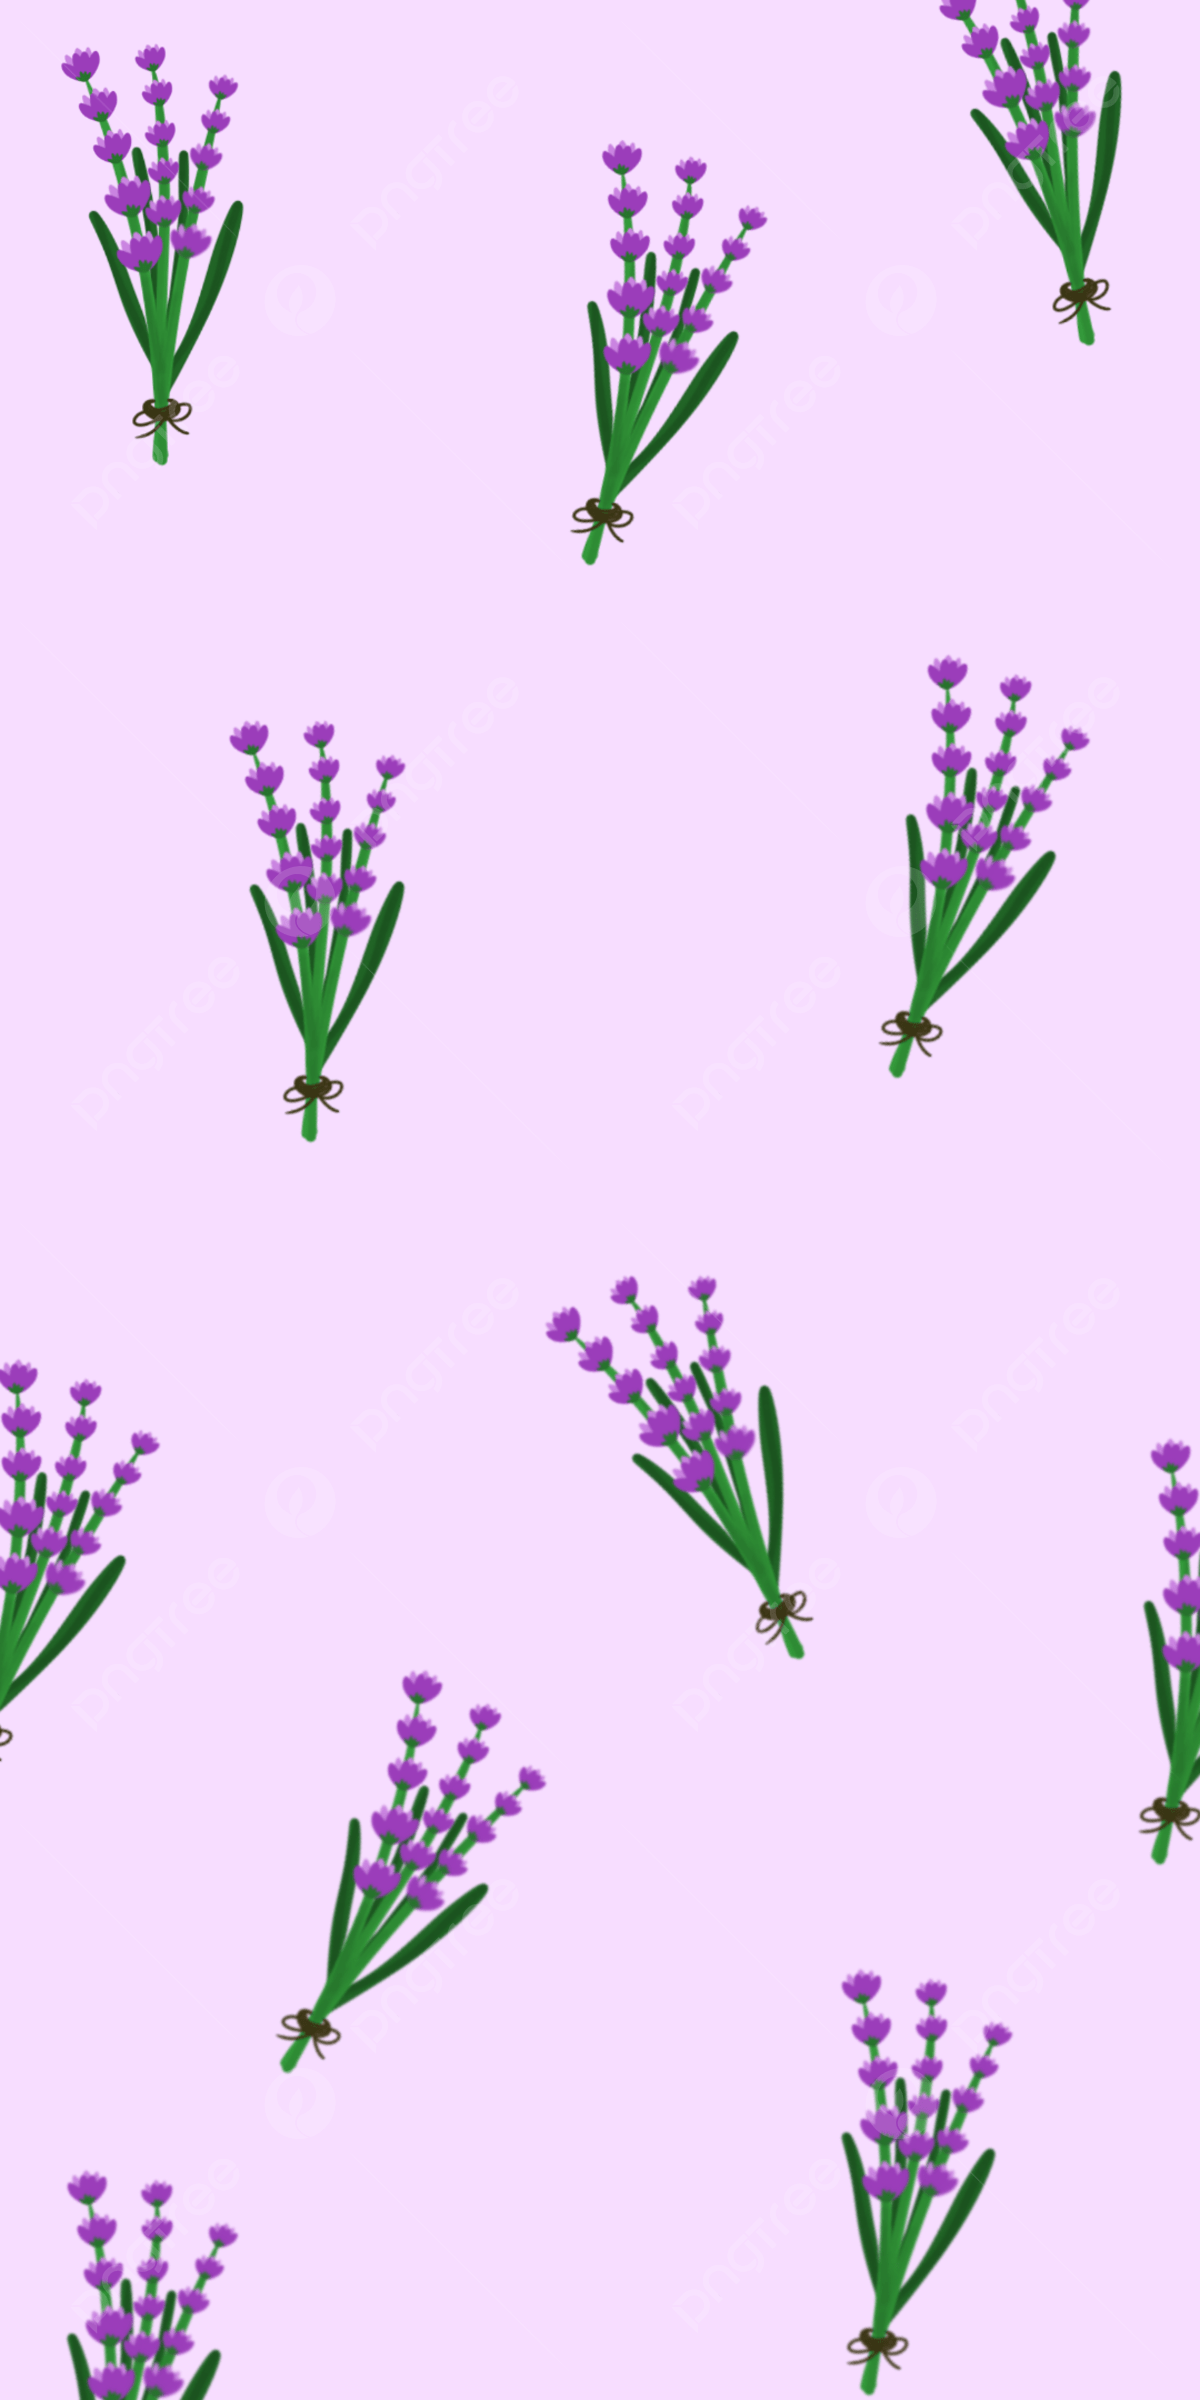 Lavender Bouquet Aesthetic Wallpaper Background, Lavender, Aesthetic Wallpaper, Bouquet Background Image for Free Download